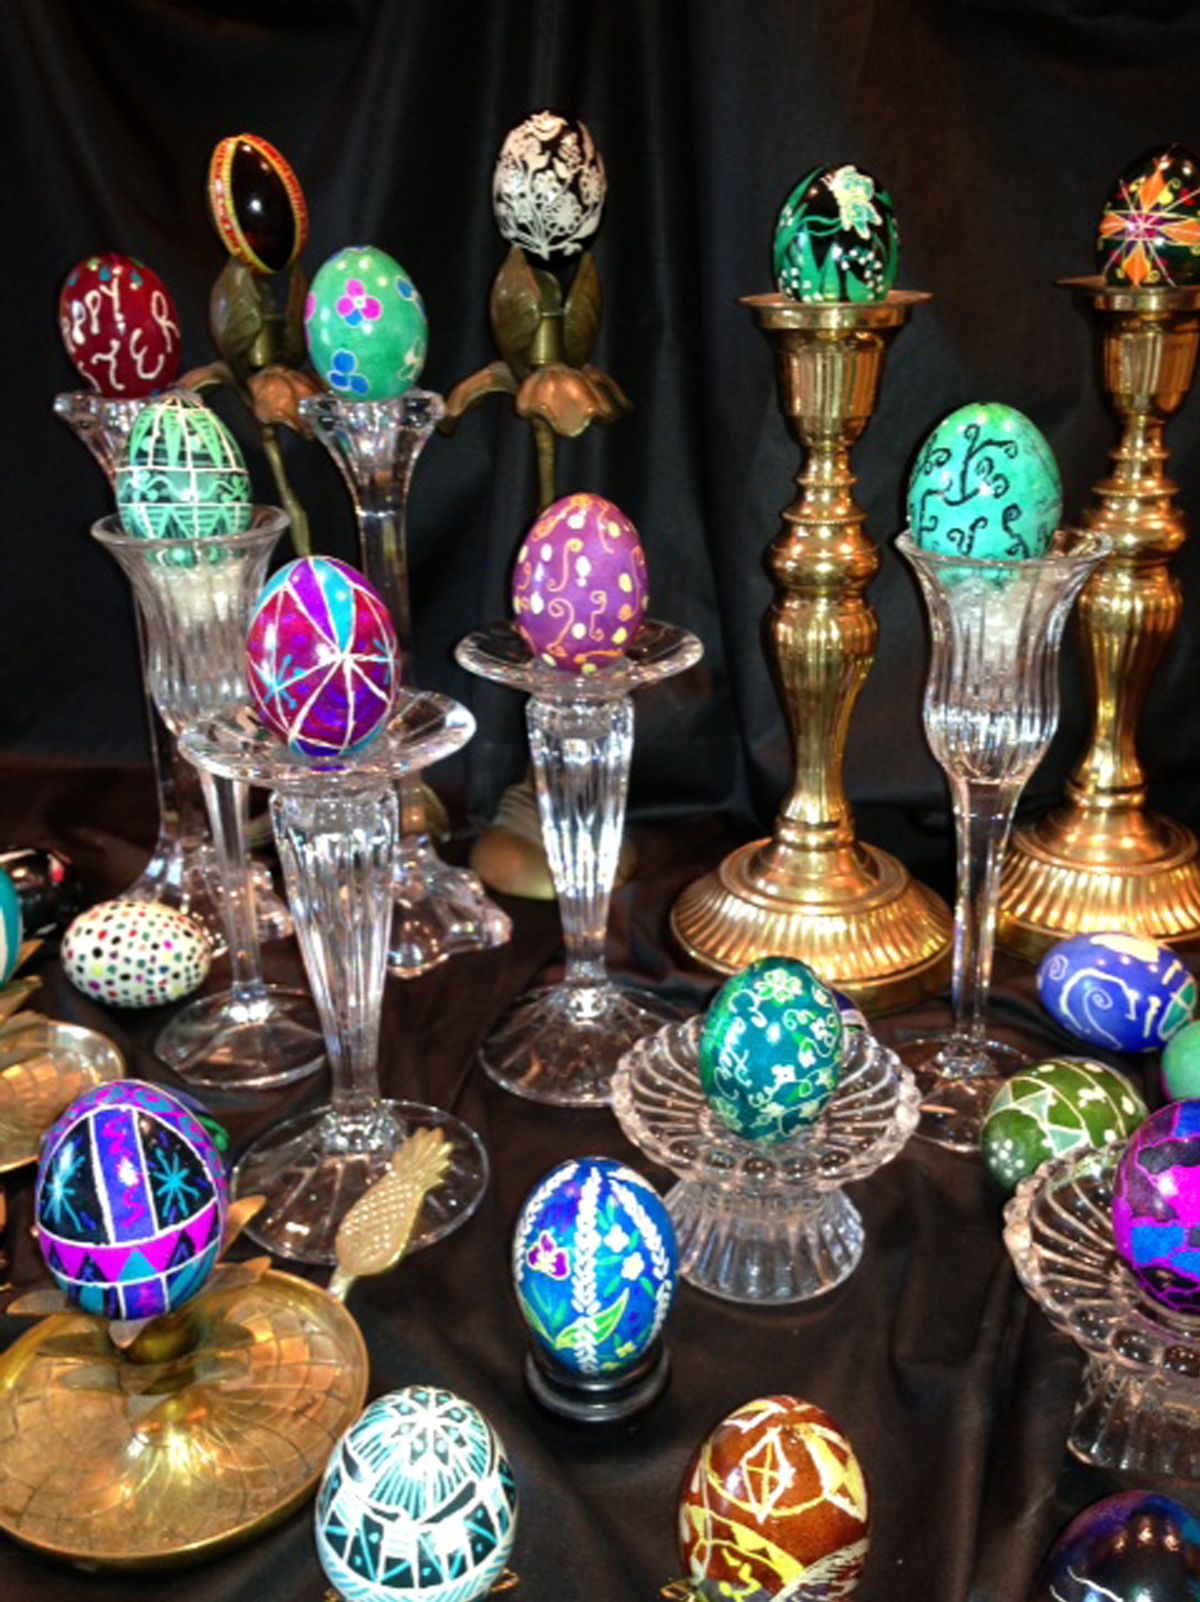 Psyanky uses a wax-resist method to turn dyed eggs into keepsakes worth displaying.